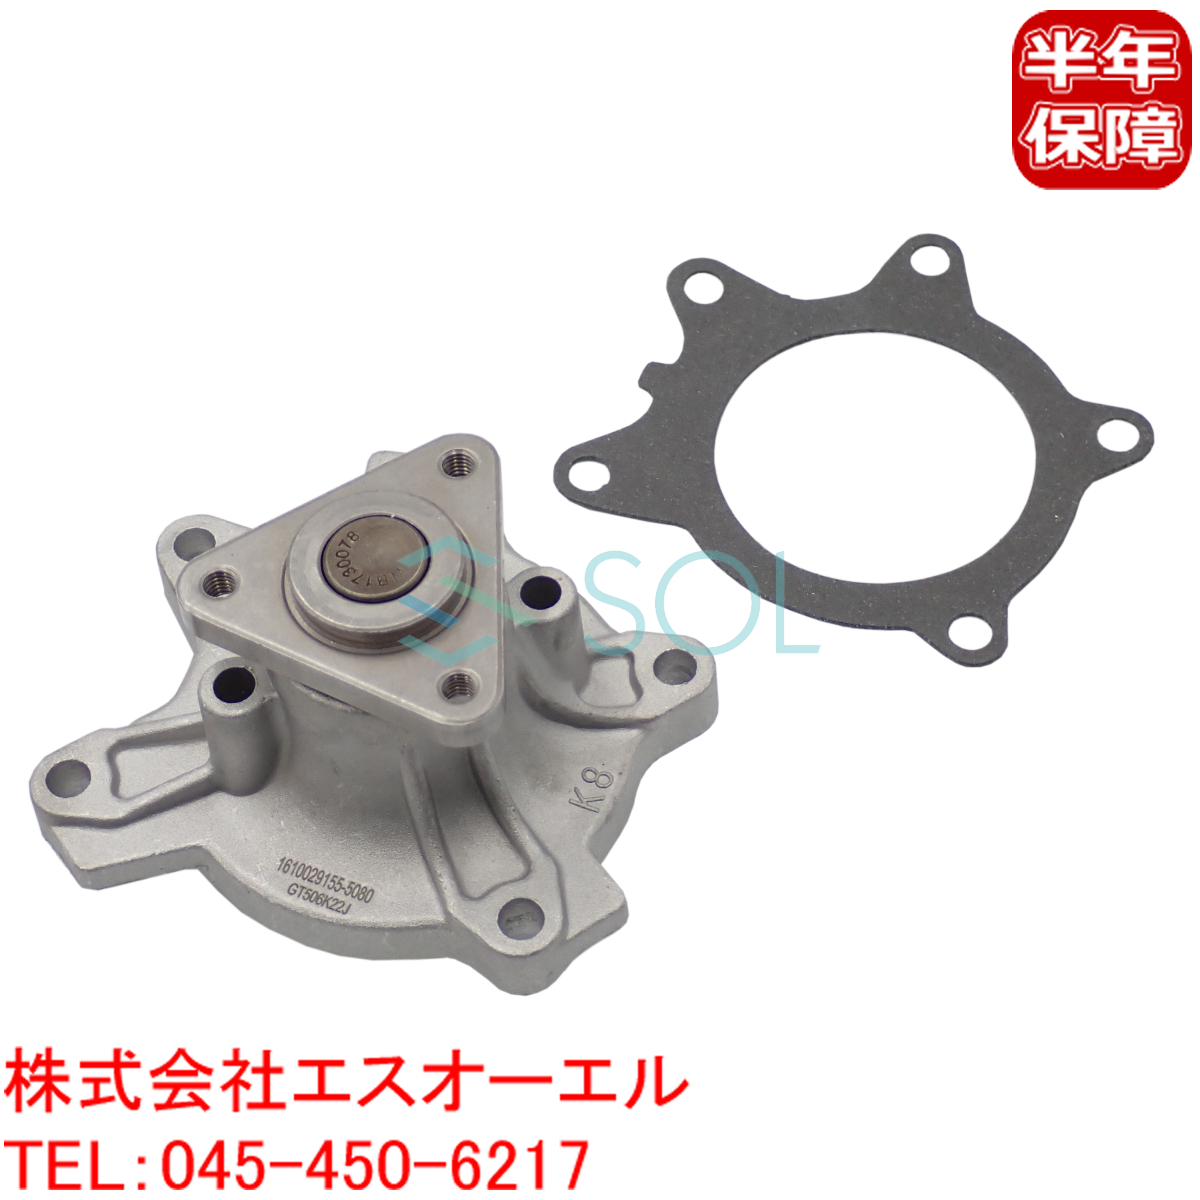  Toyota Ist NCP61 water pump 1610029155 18 o'clock till the same day shipping 